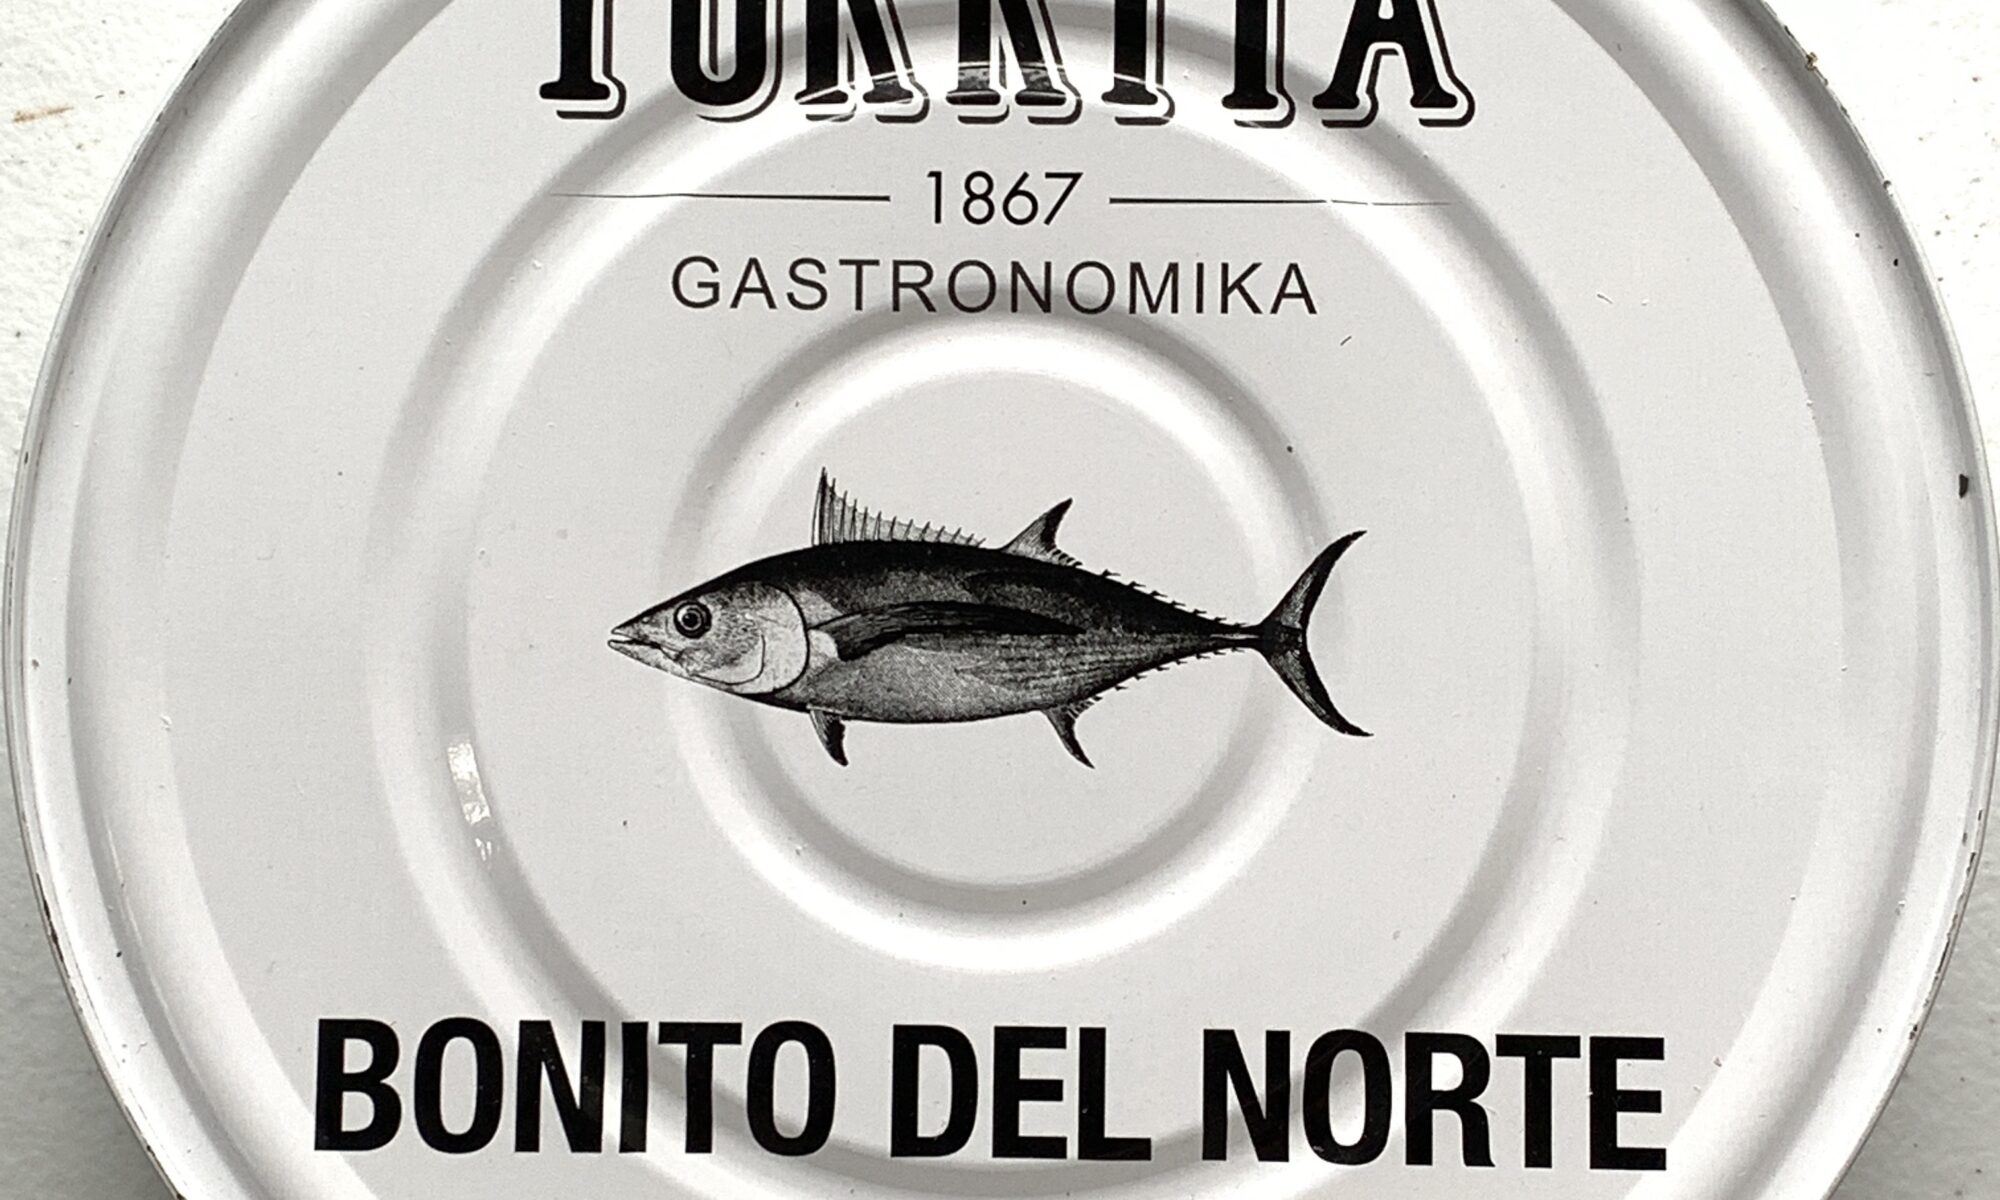 Image of the front of a tin of Yurrita Bonito del Norte in Olive Oil, 1850g, Large Format